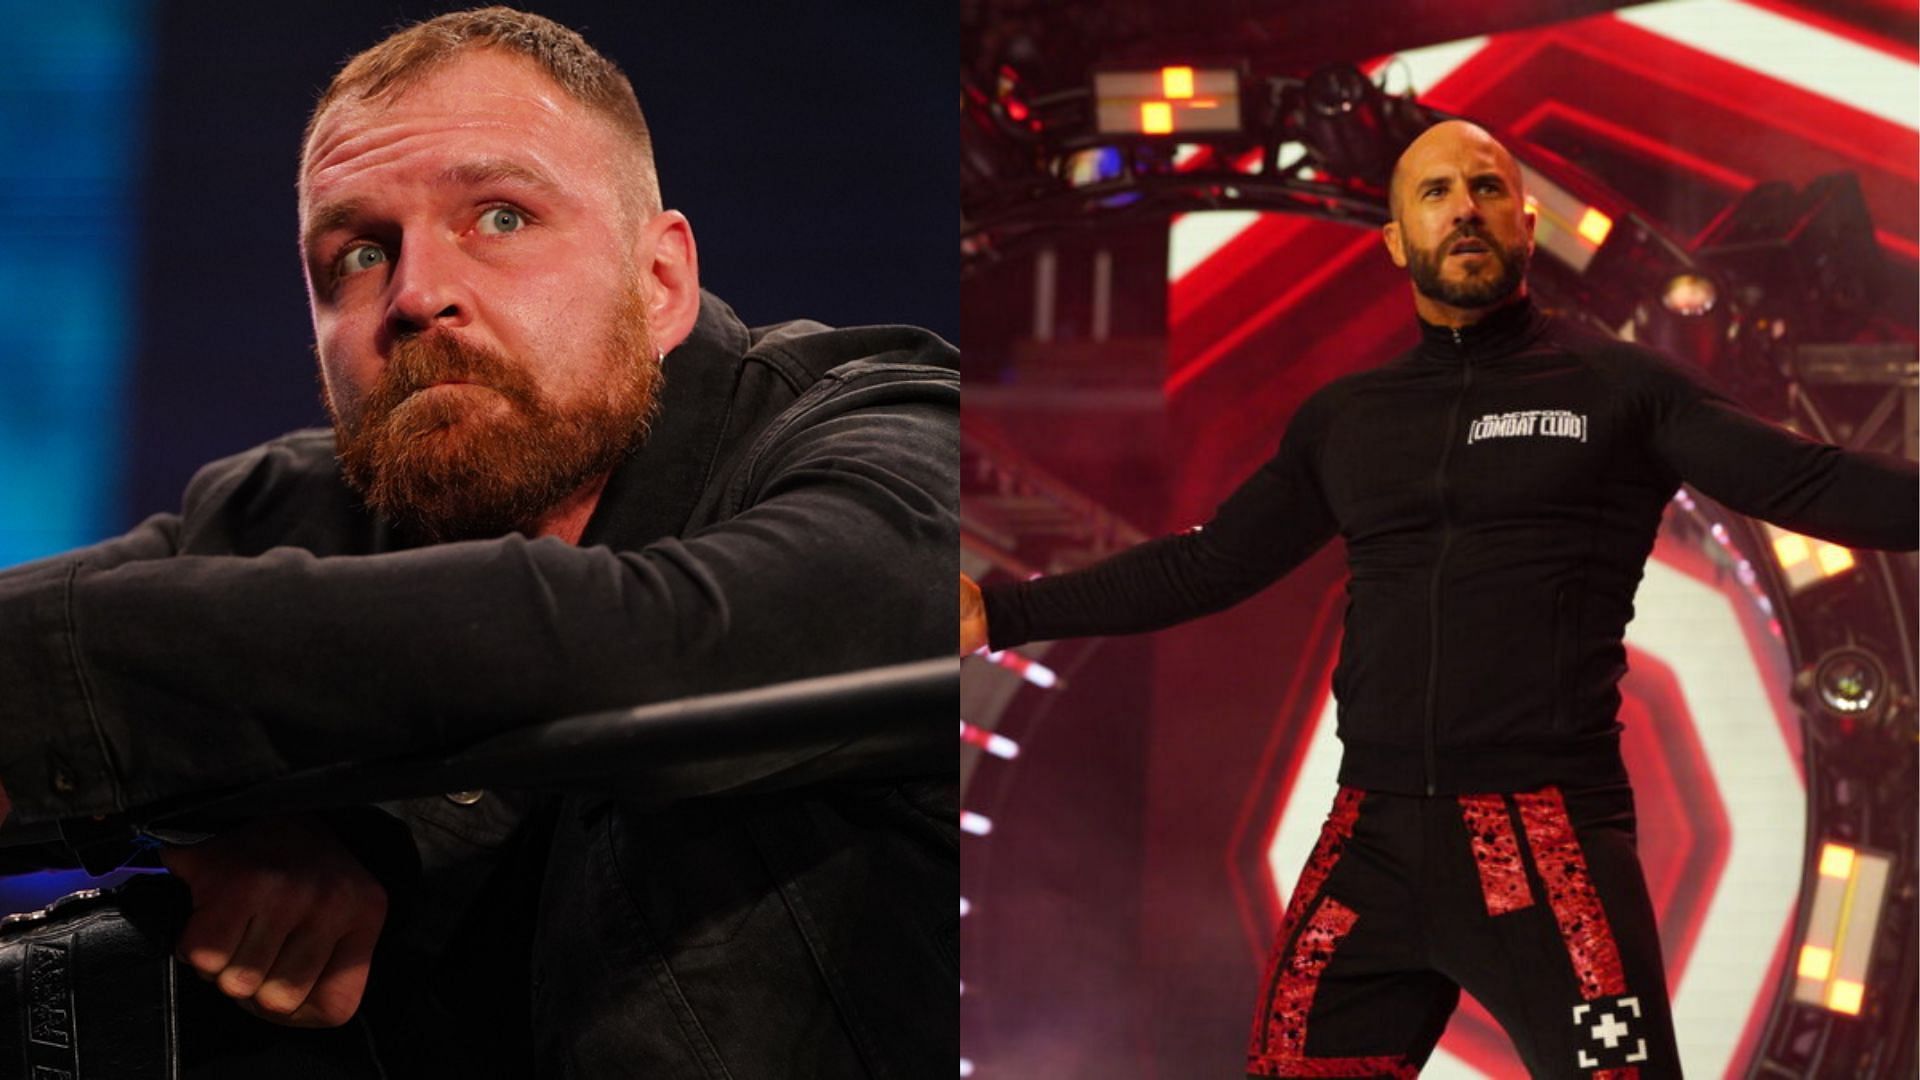 Jon Moxley and Claudio Castagnoli are now stablemates in the Blackpool Combat Club